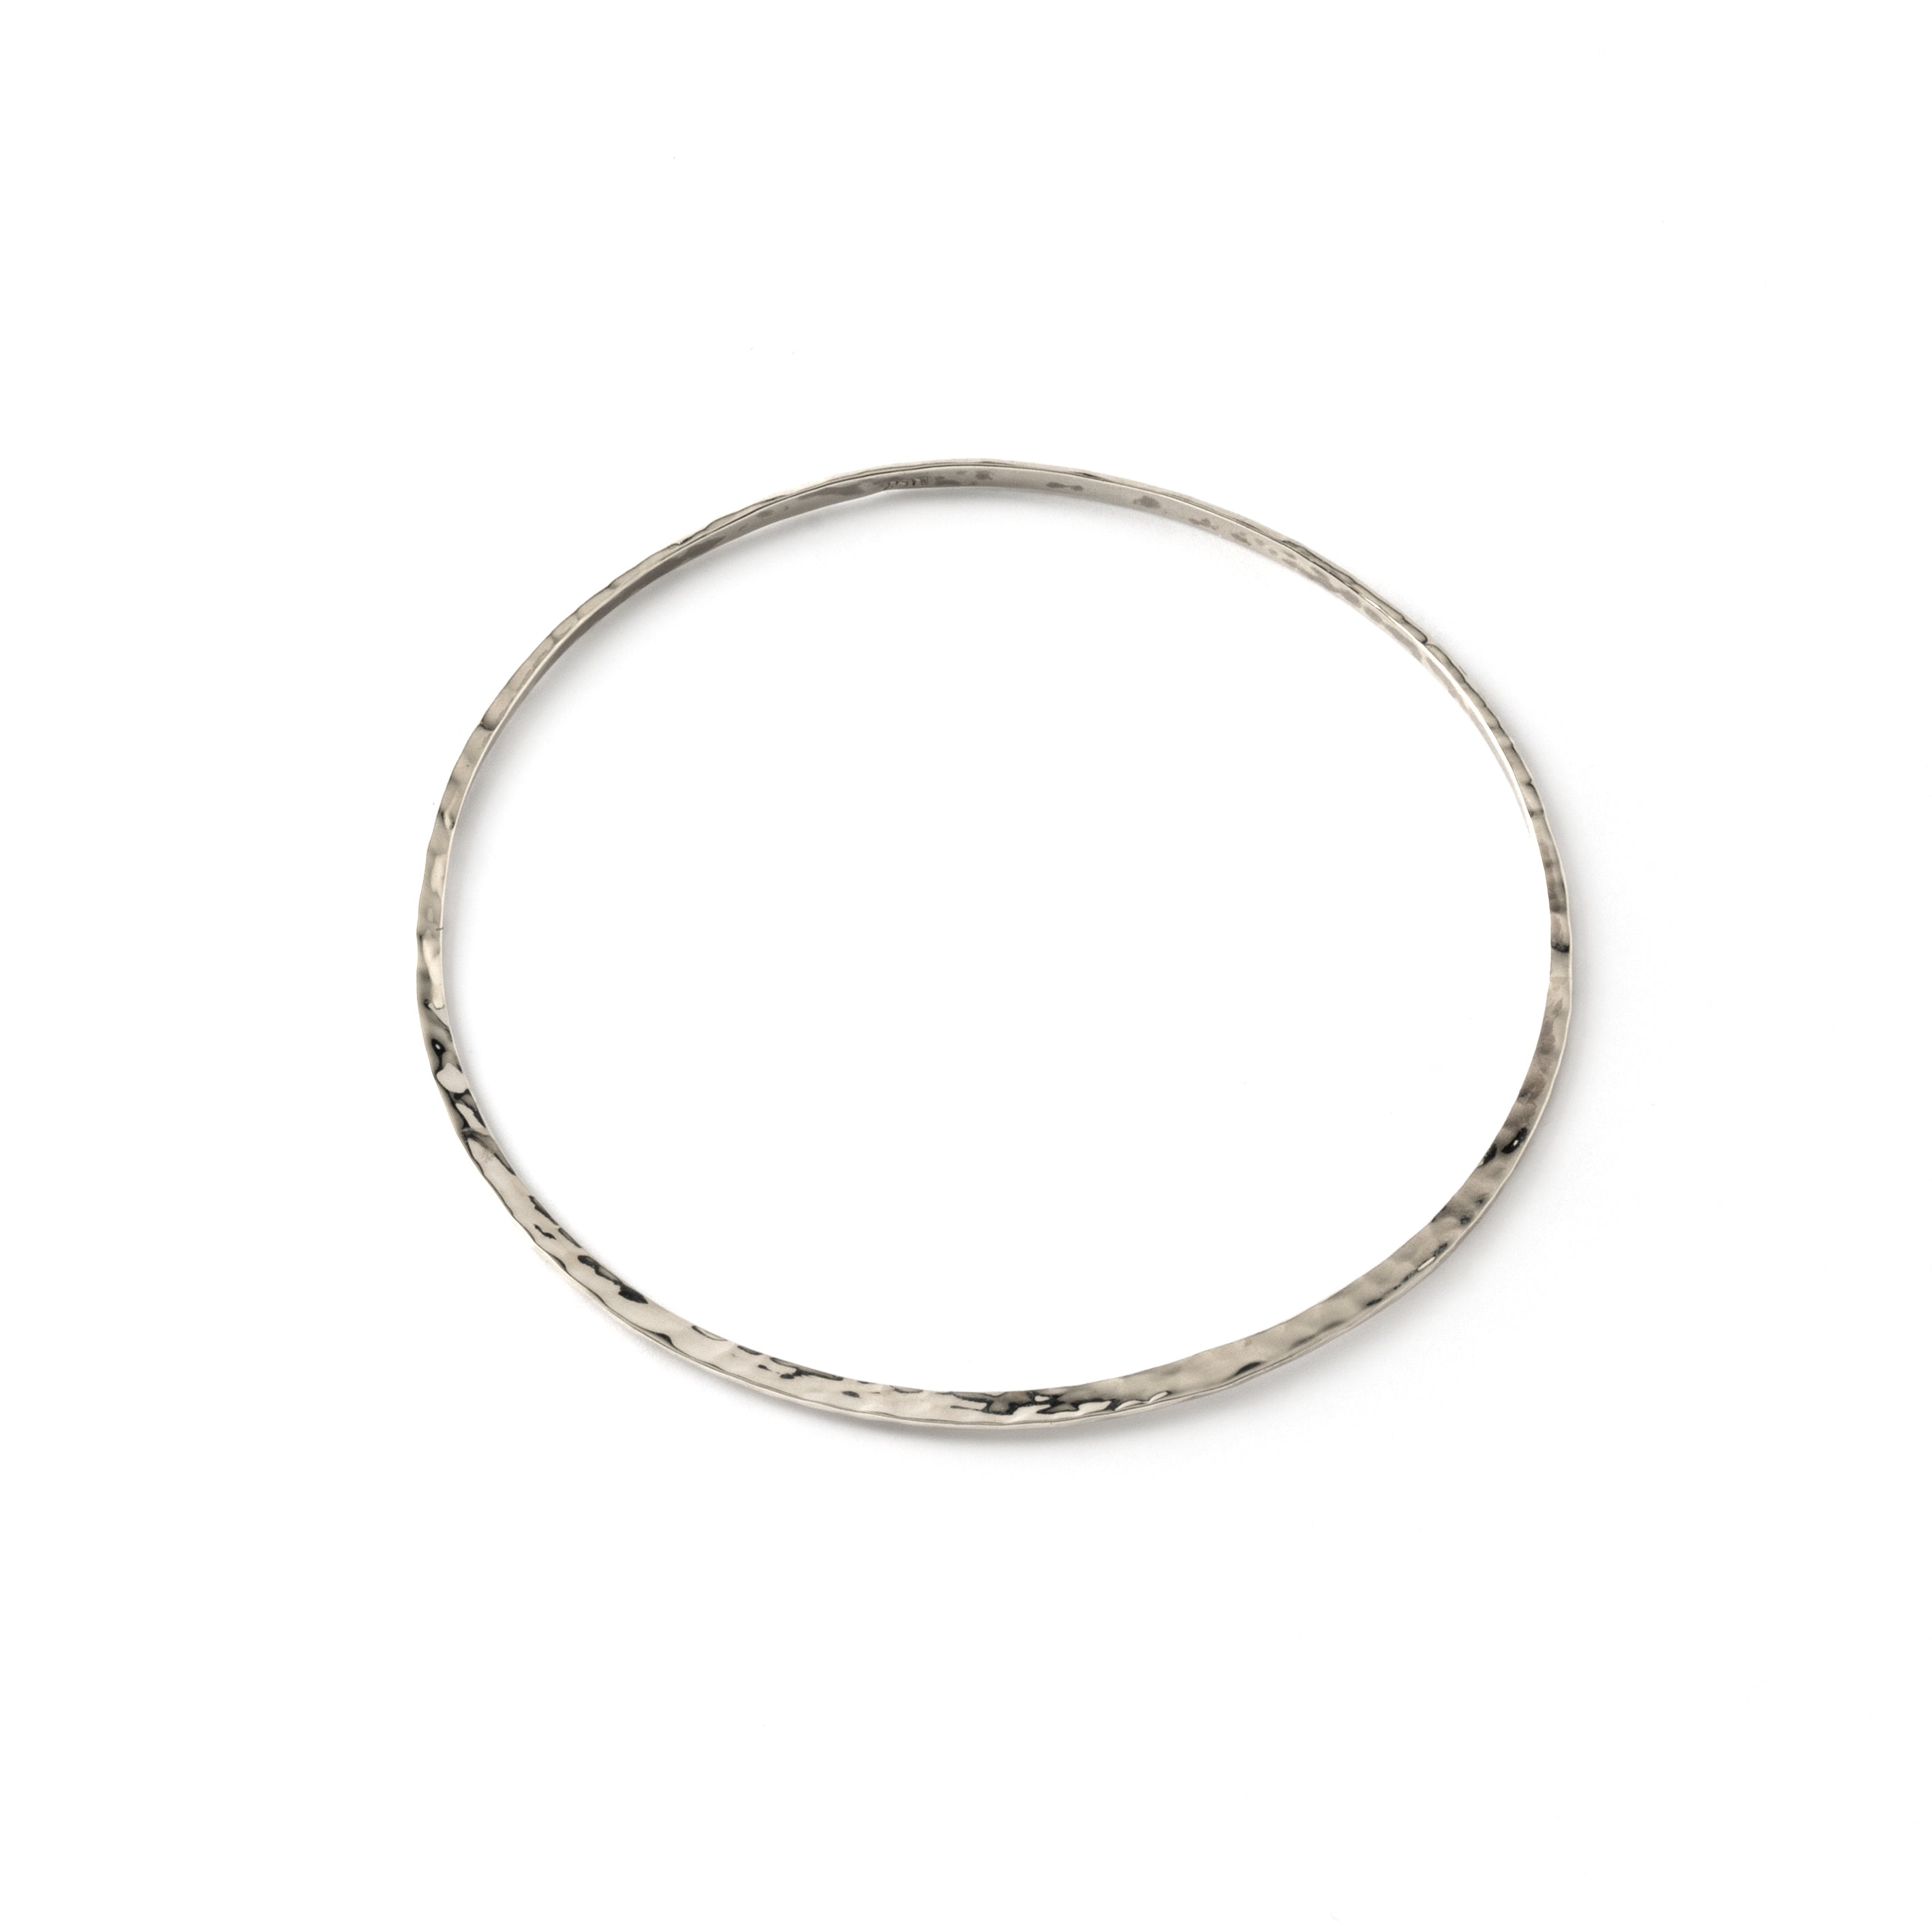 Sterling silver hammered flat open bangle